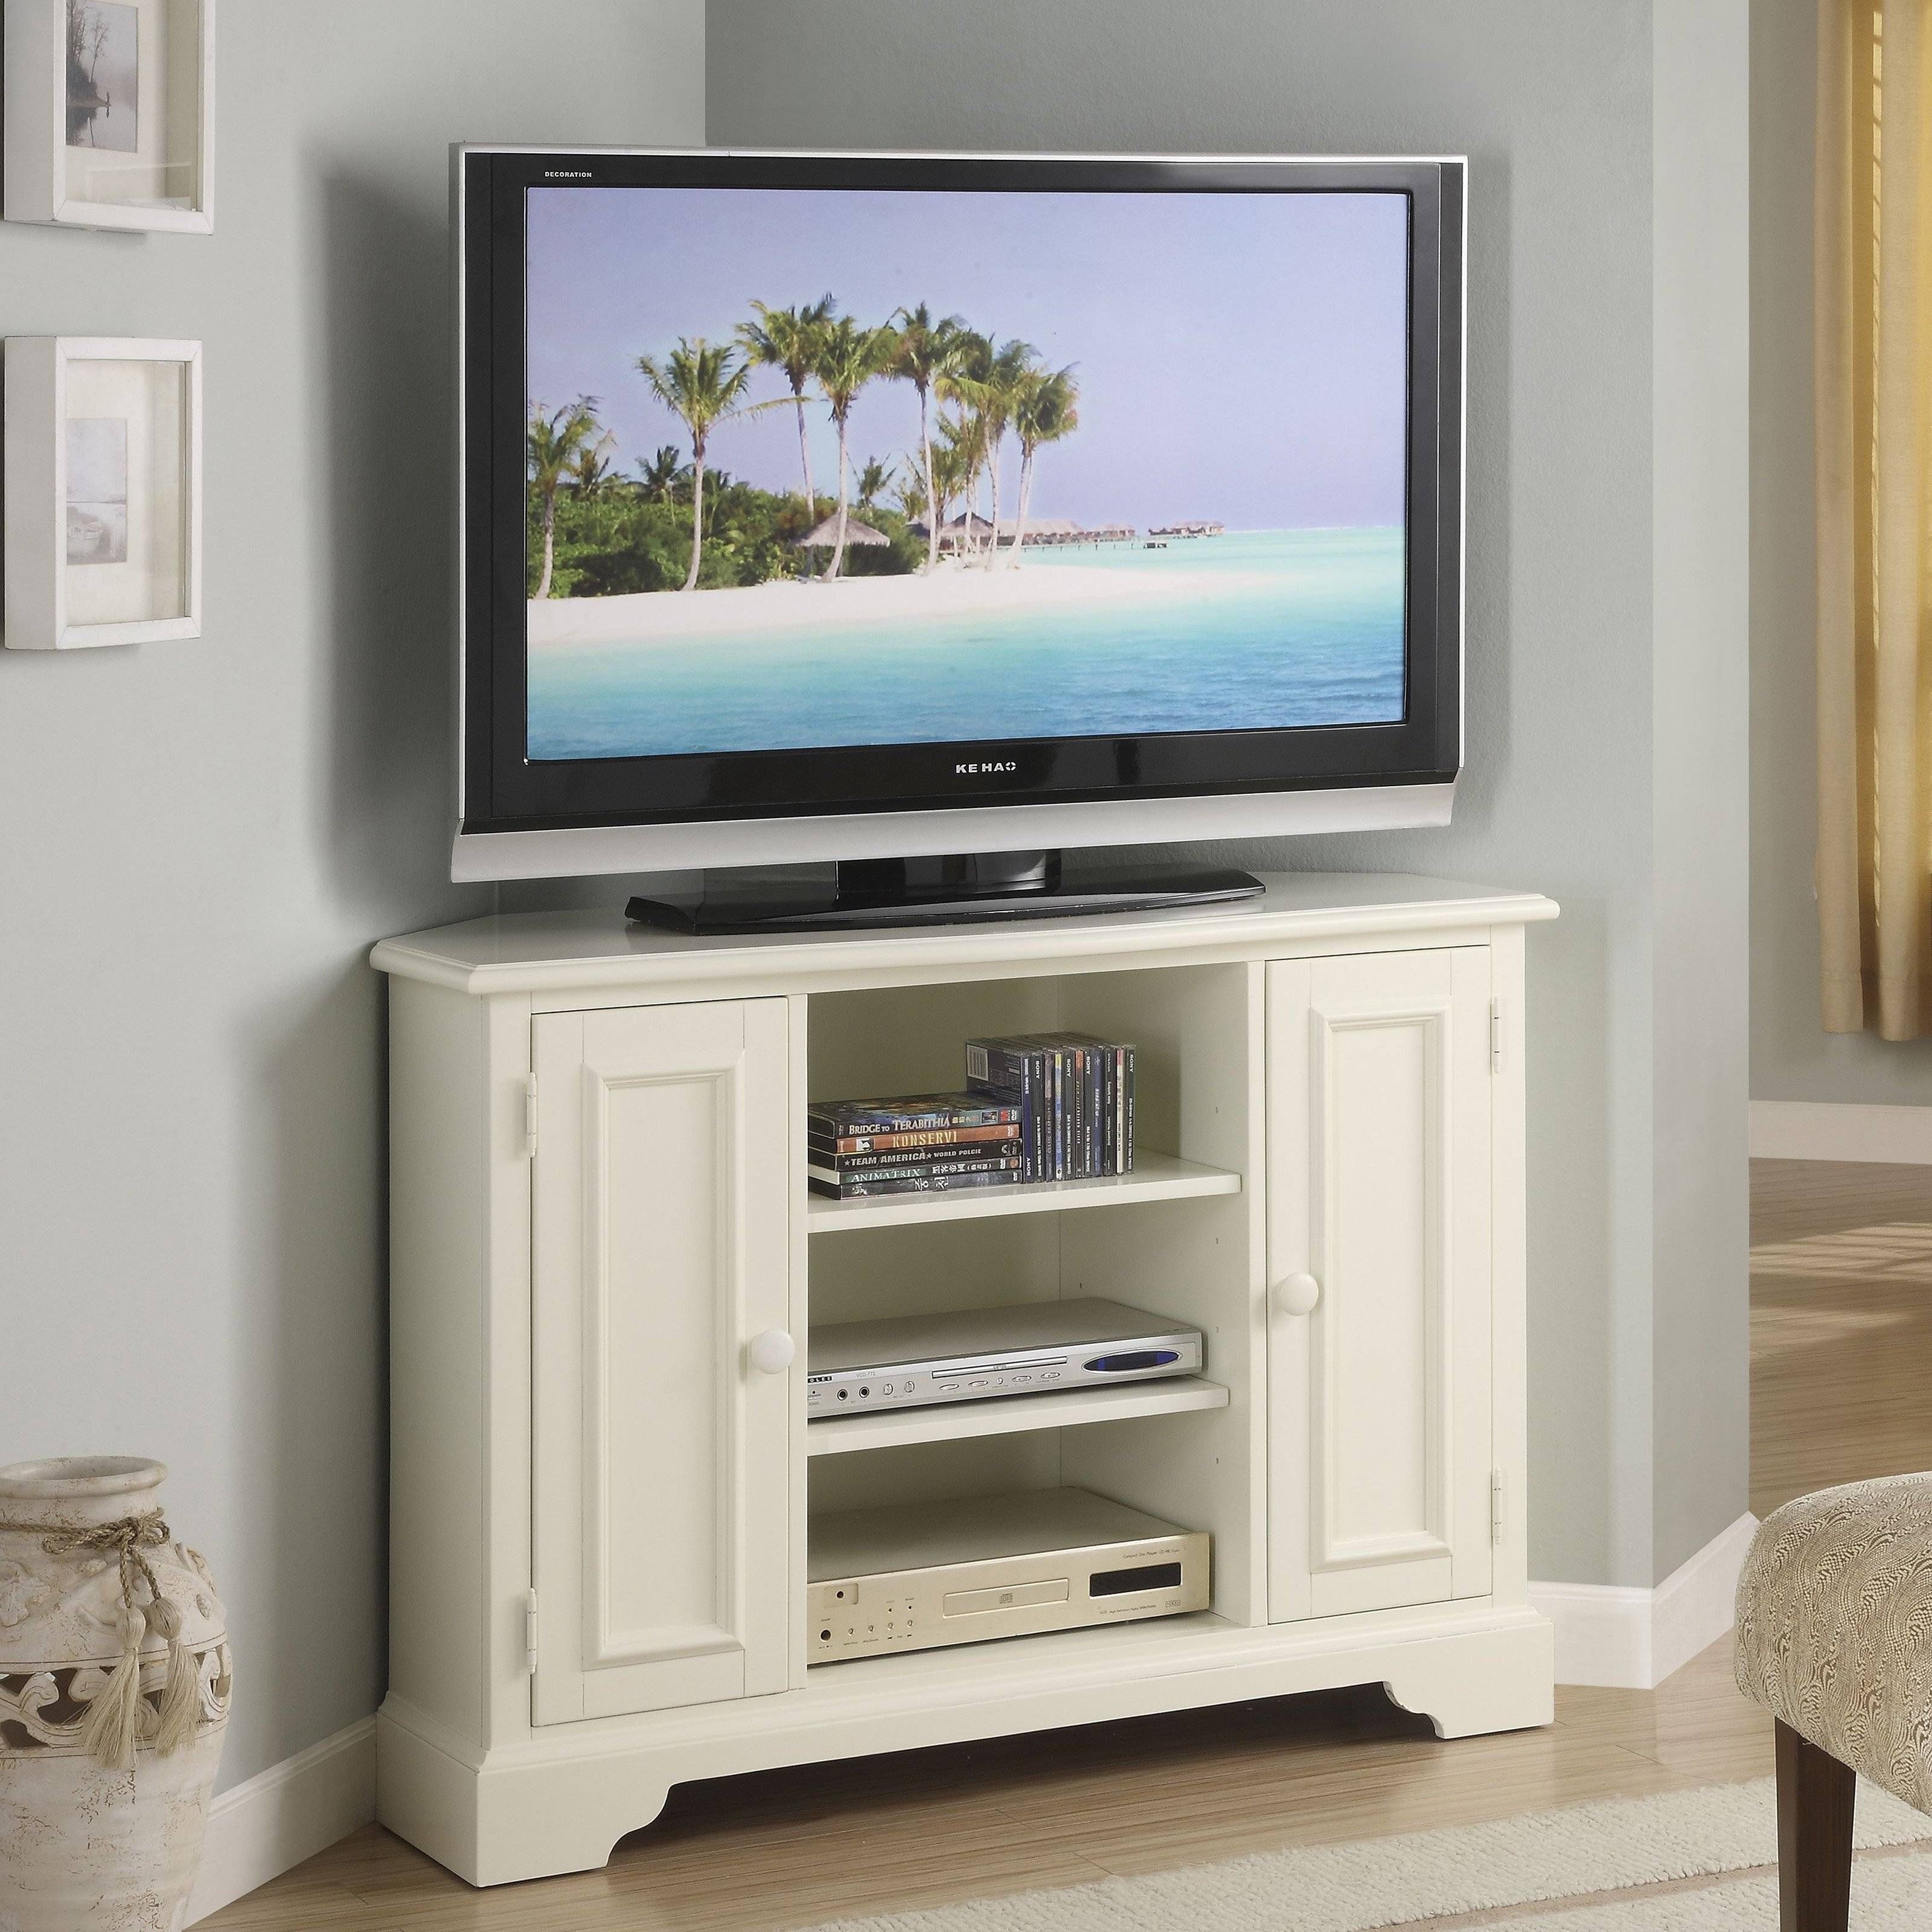 White Painted Mahogany Wood Corner Tv Stand With Classic Swing Regarding Corner Tv Cabinets For Flat Screens With Doors (View 11 of 15)